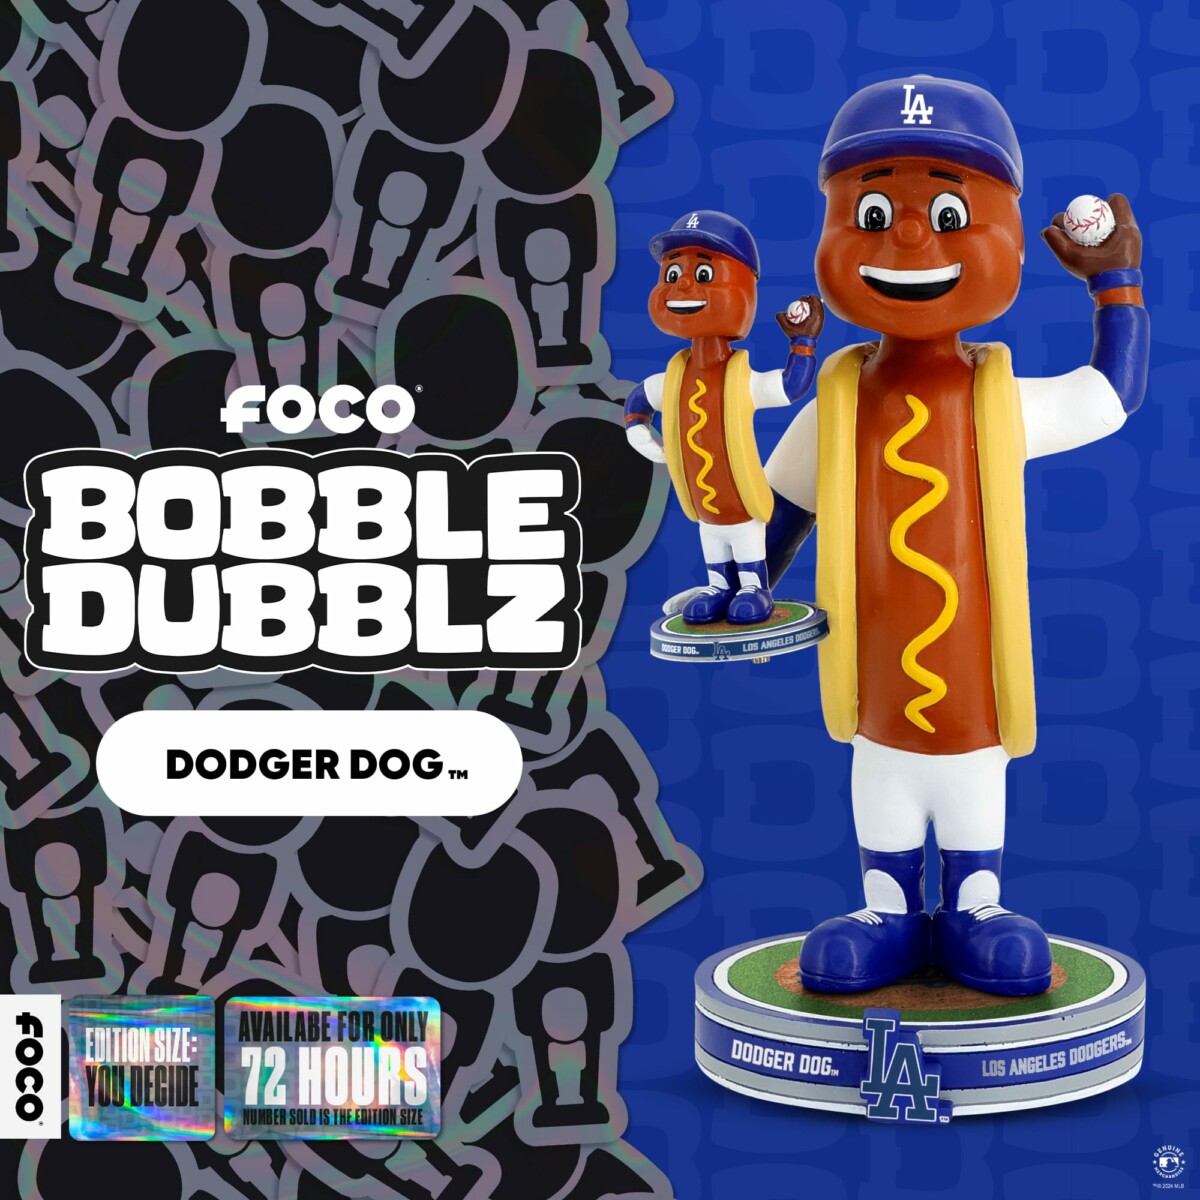 Exclusive: FOCO Releases Special Dodger Dog Mascot